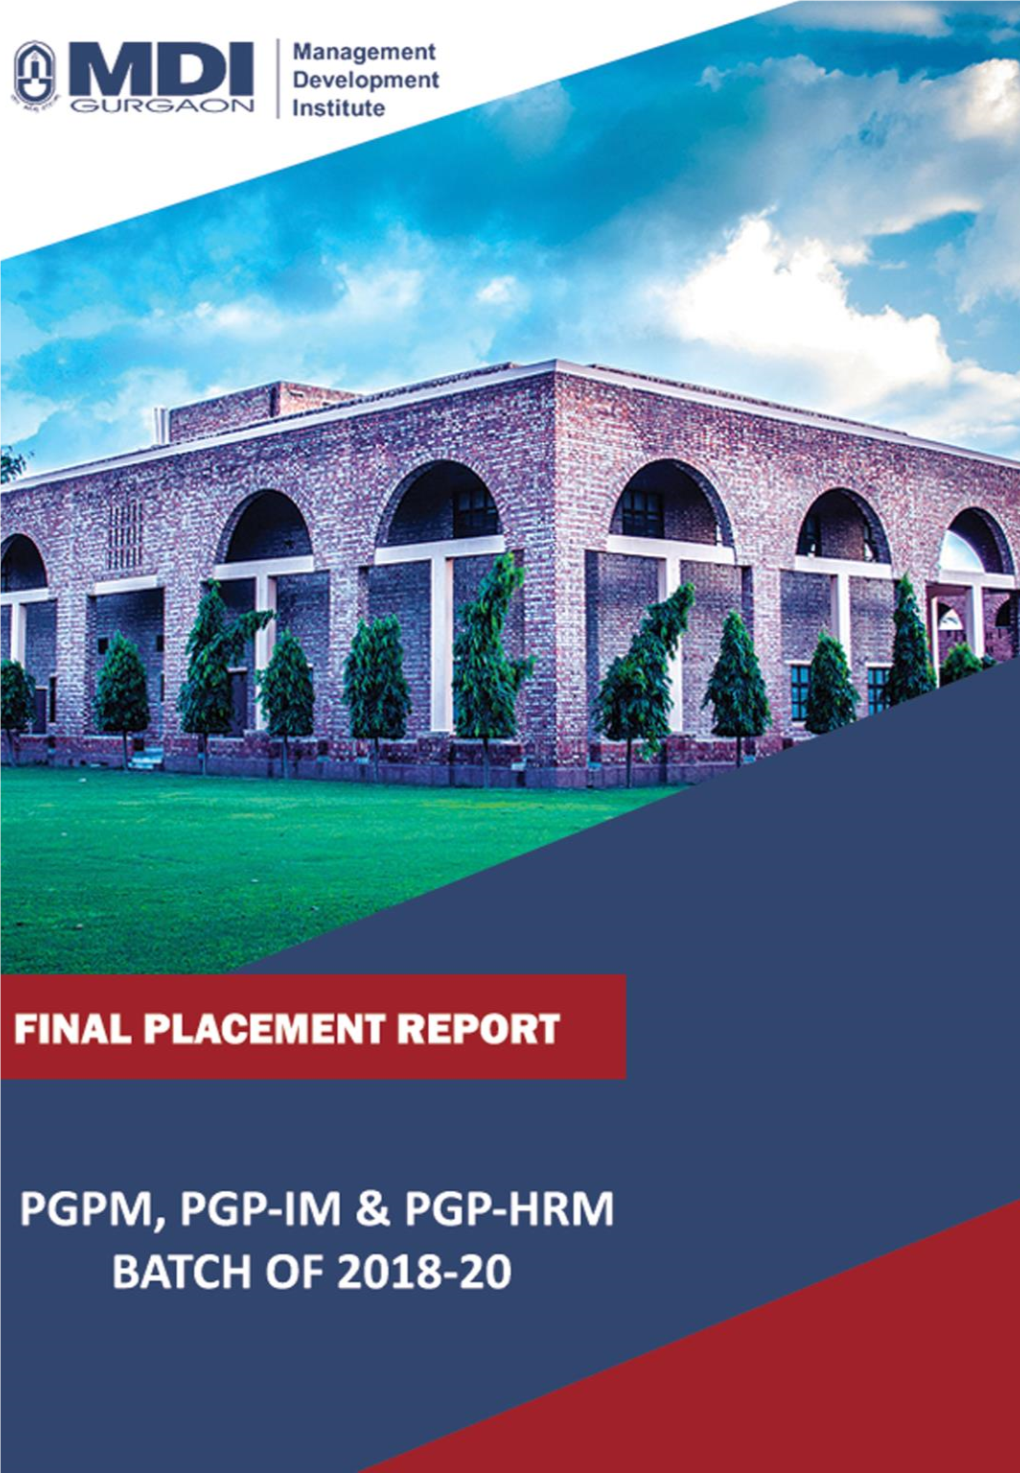 Final Placement Report (Batch of 2018-20)